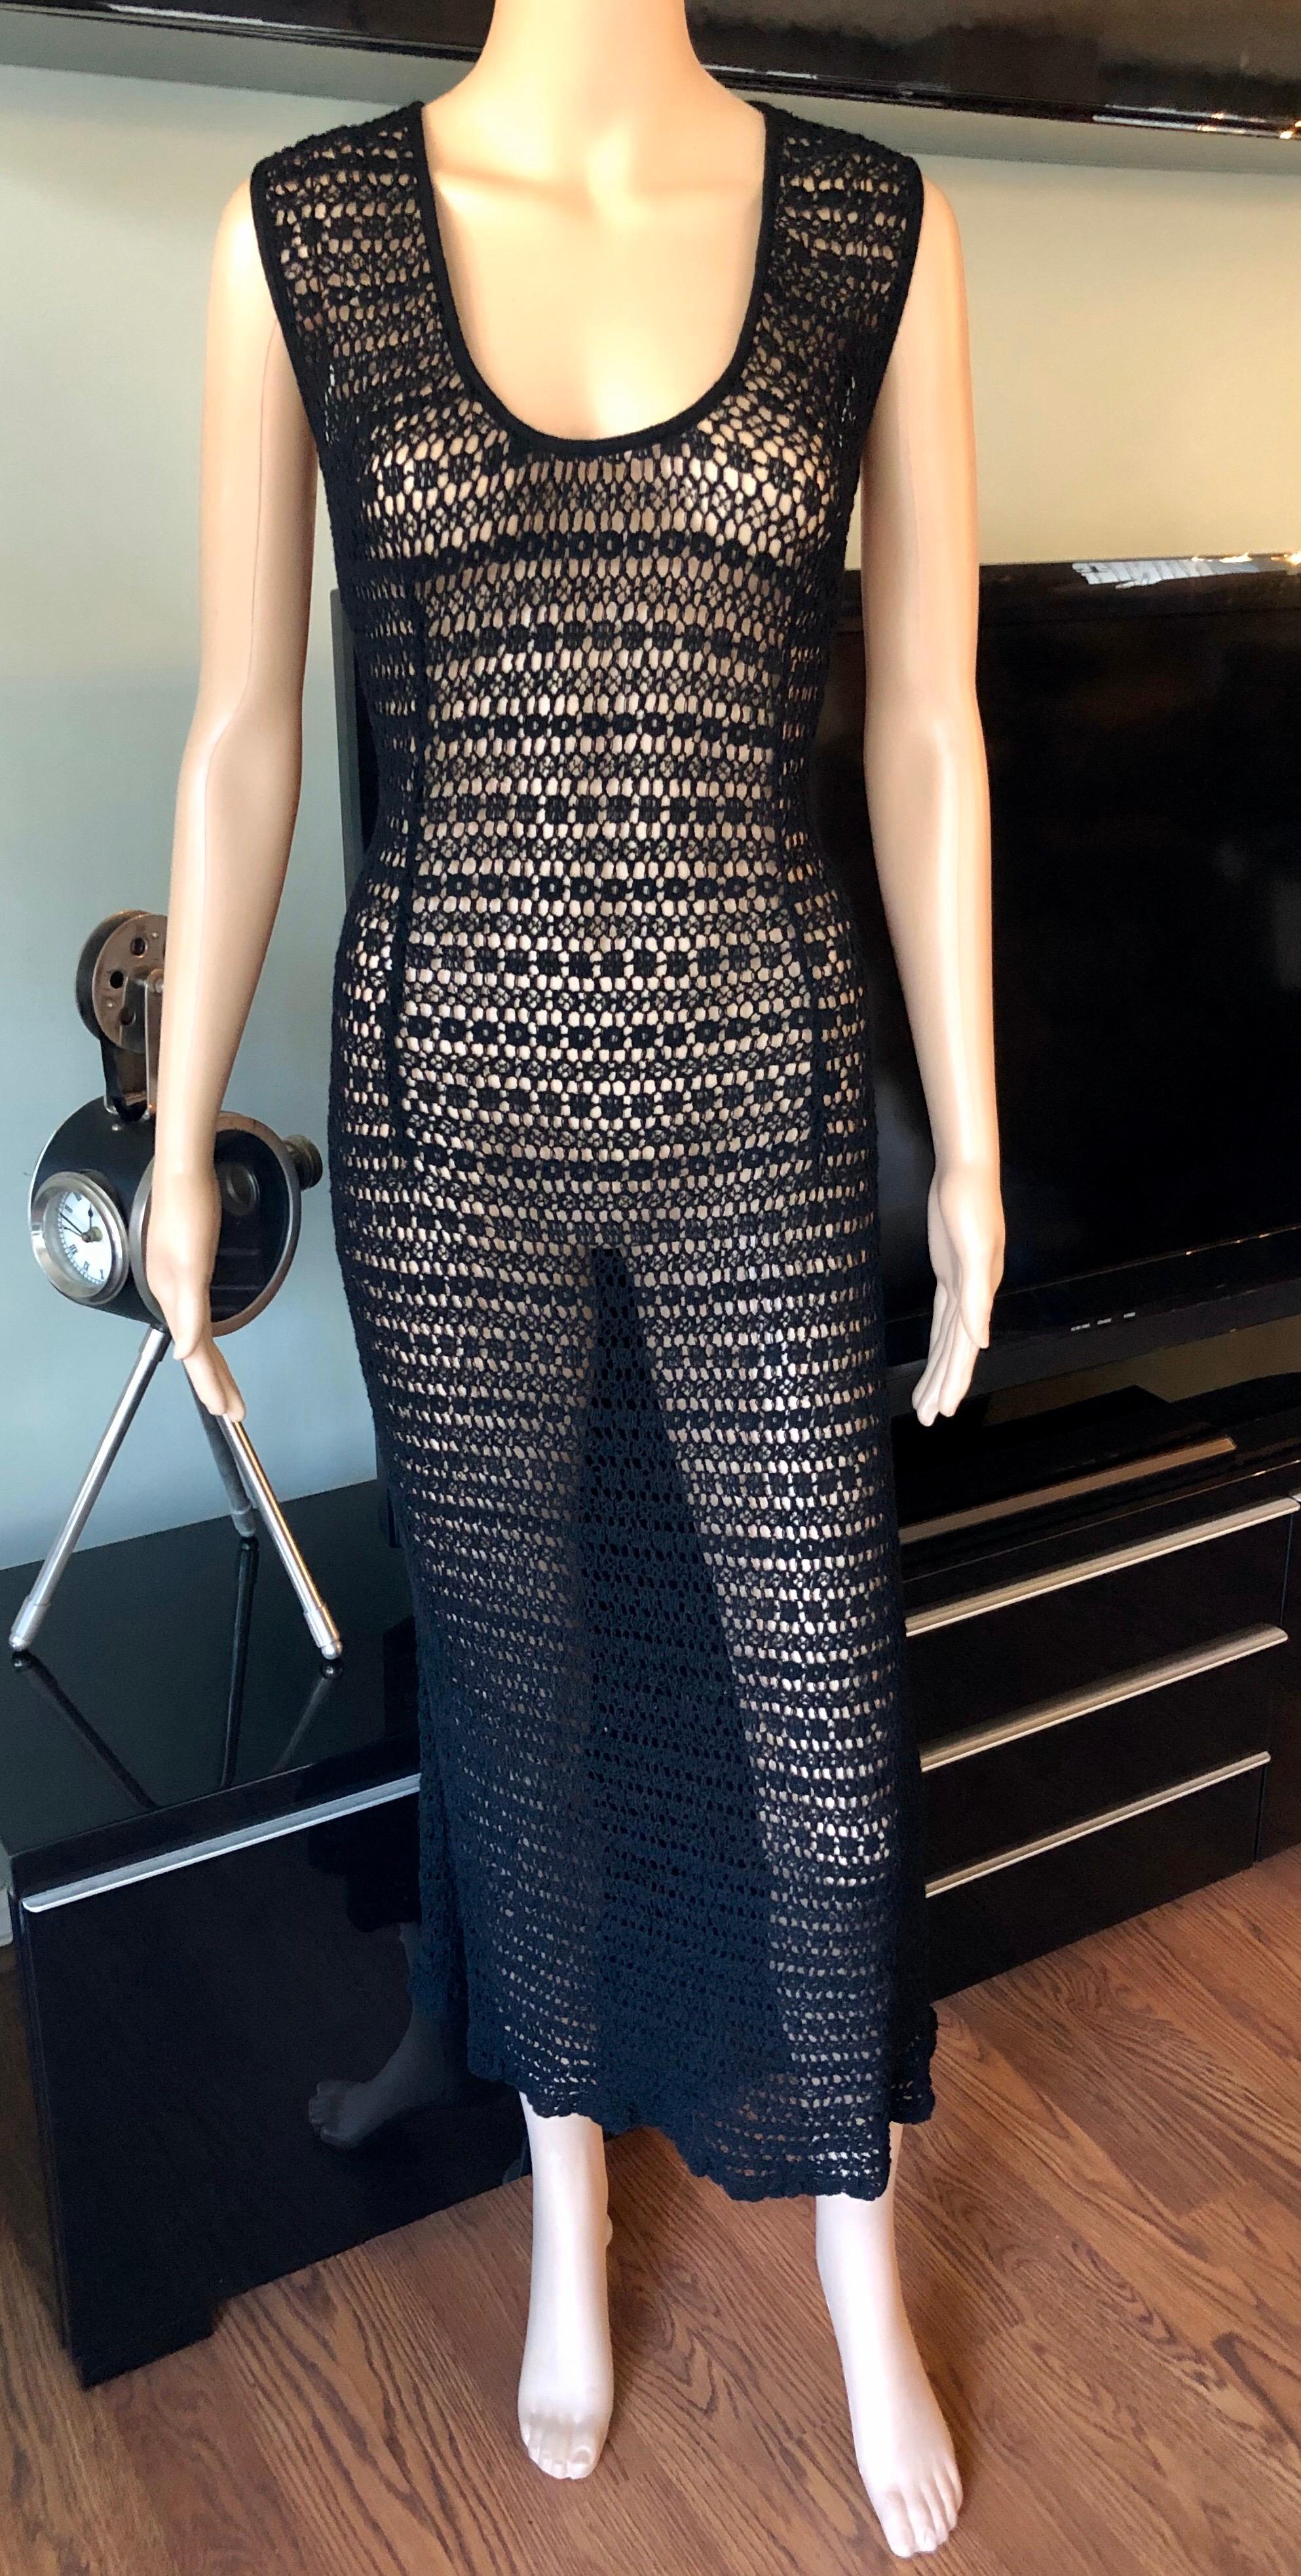 Dolce & Gabbana Vintage 1990's Sheer Open Knit Crochet Fishnet Black Maxi Dress M/L

Dolce & Gabbana vintage dress featuring bateau neckline and open knit throughout. The size tag has been removed. The knit is very stretchy and will fit sizes M-L.